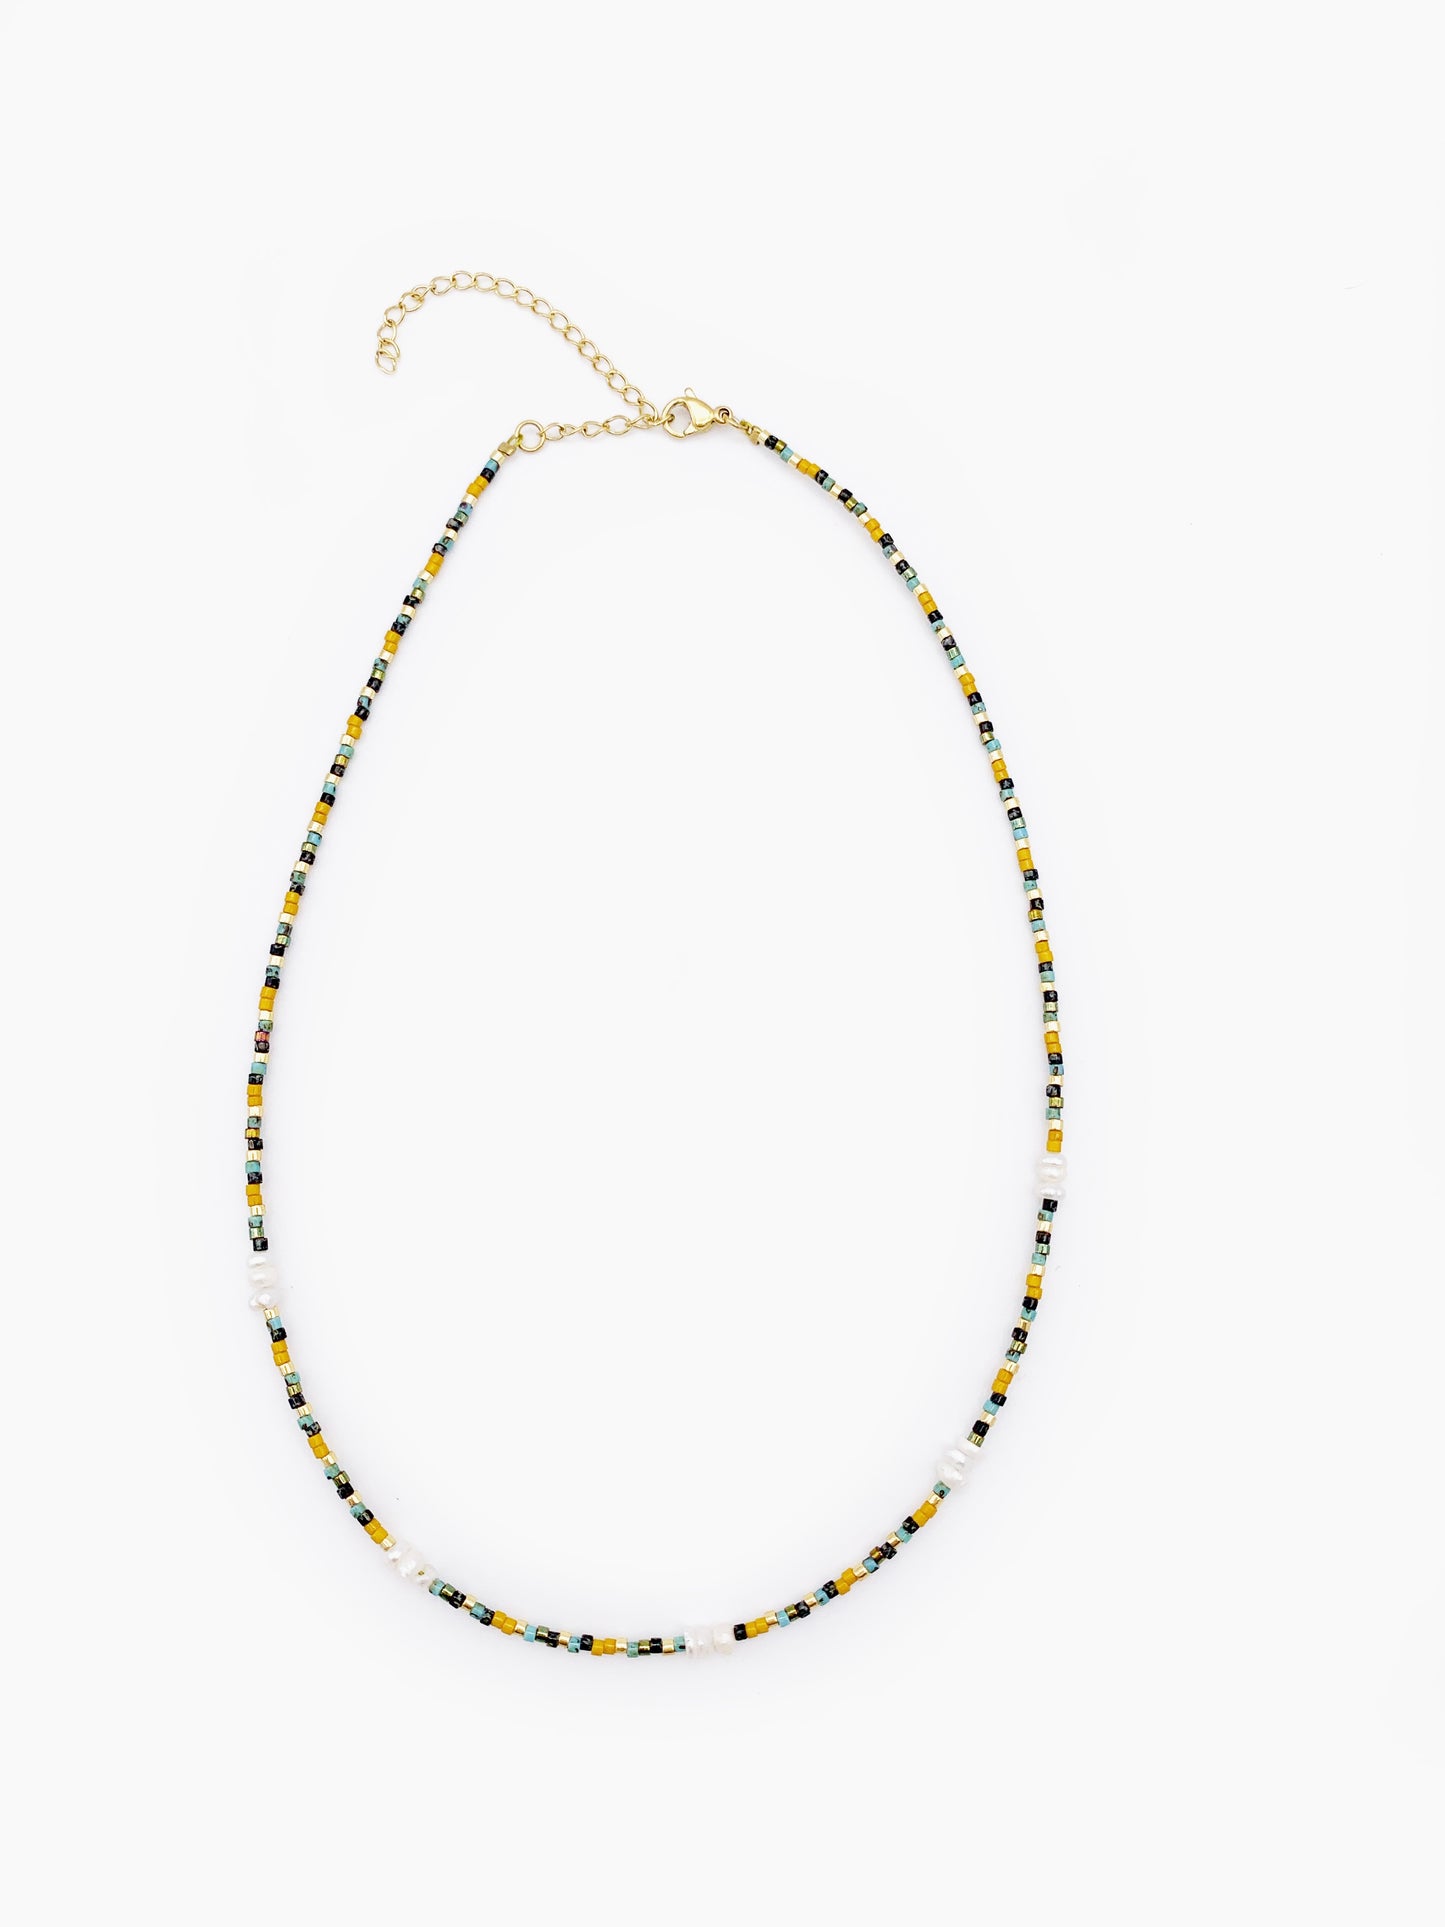 PEARLS AND YELLOW BEADS NECKLACE